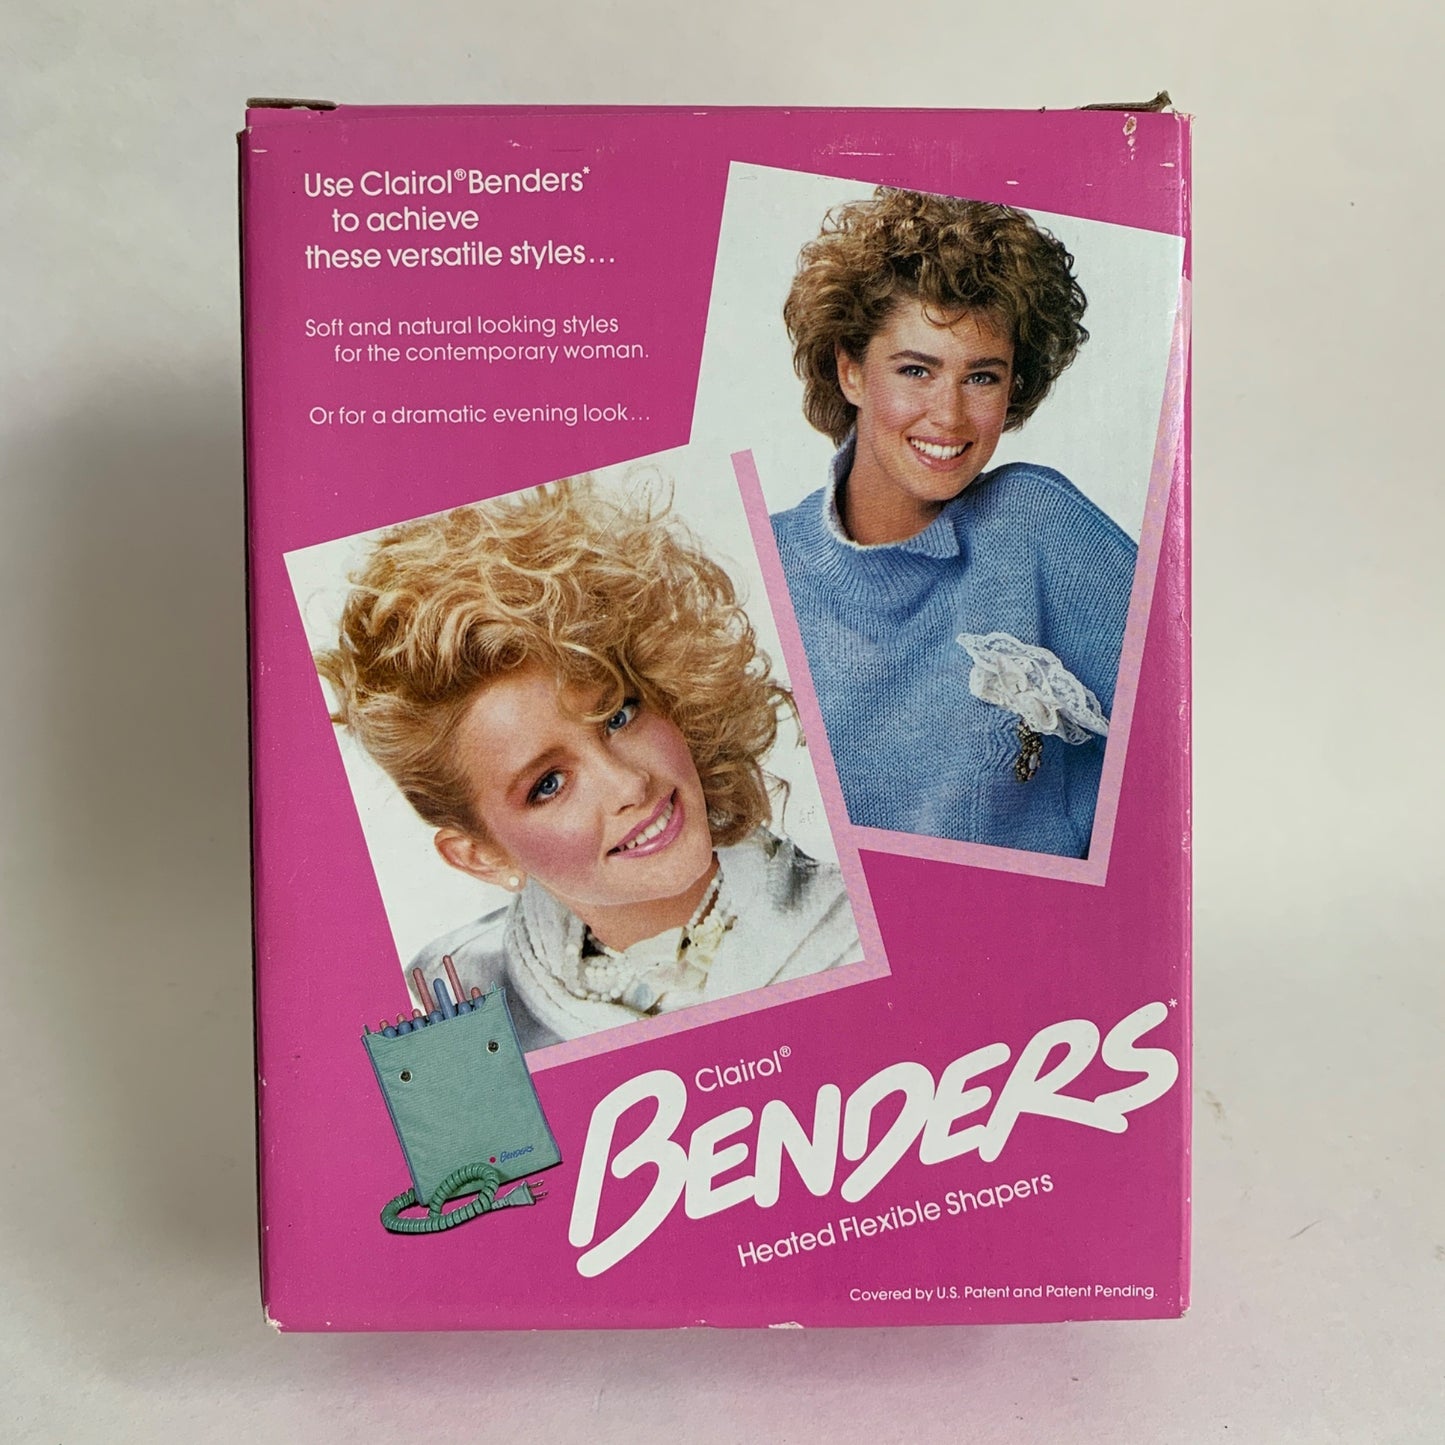 Clairol Benders Heated Flexible Shapers Hair Curlers With Box